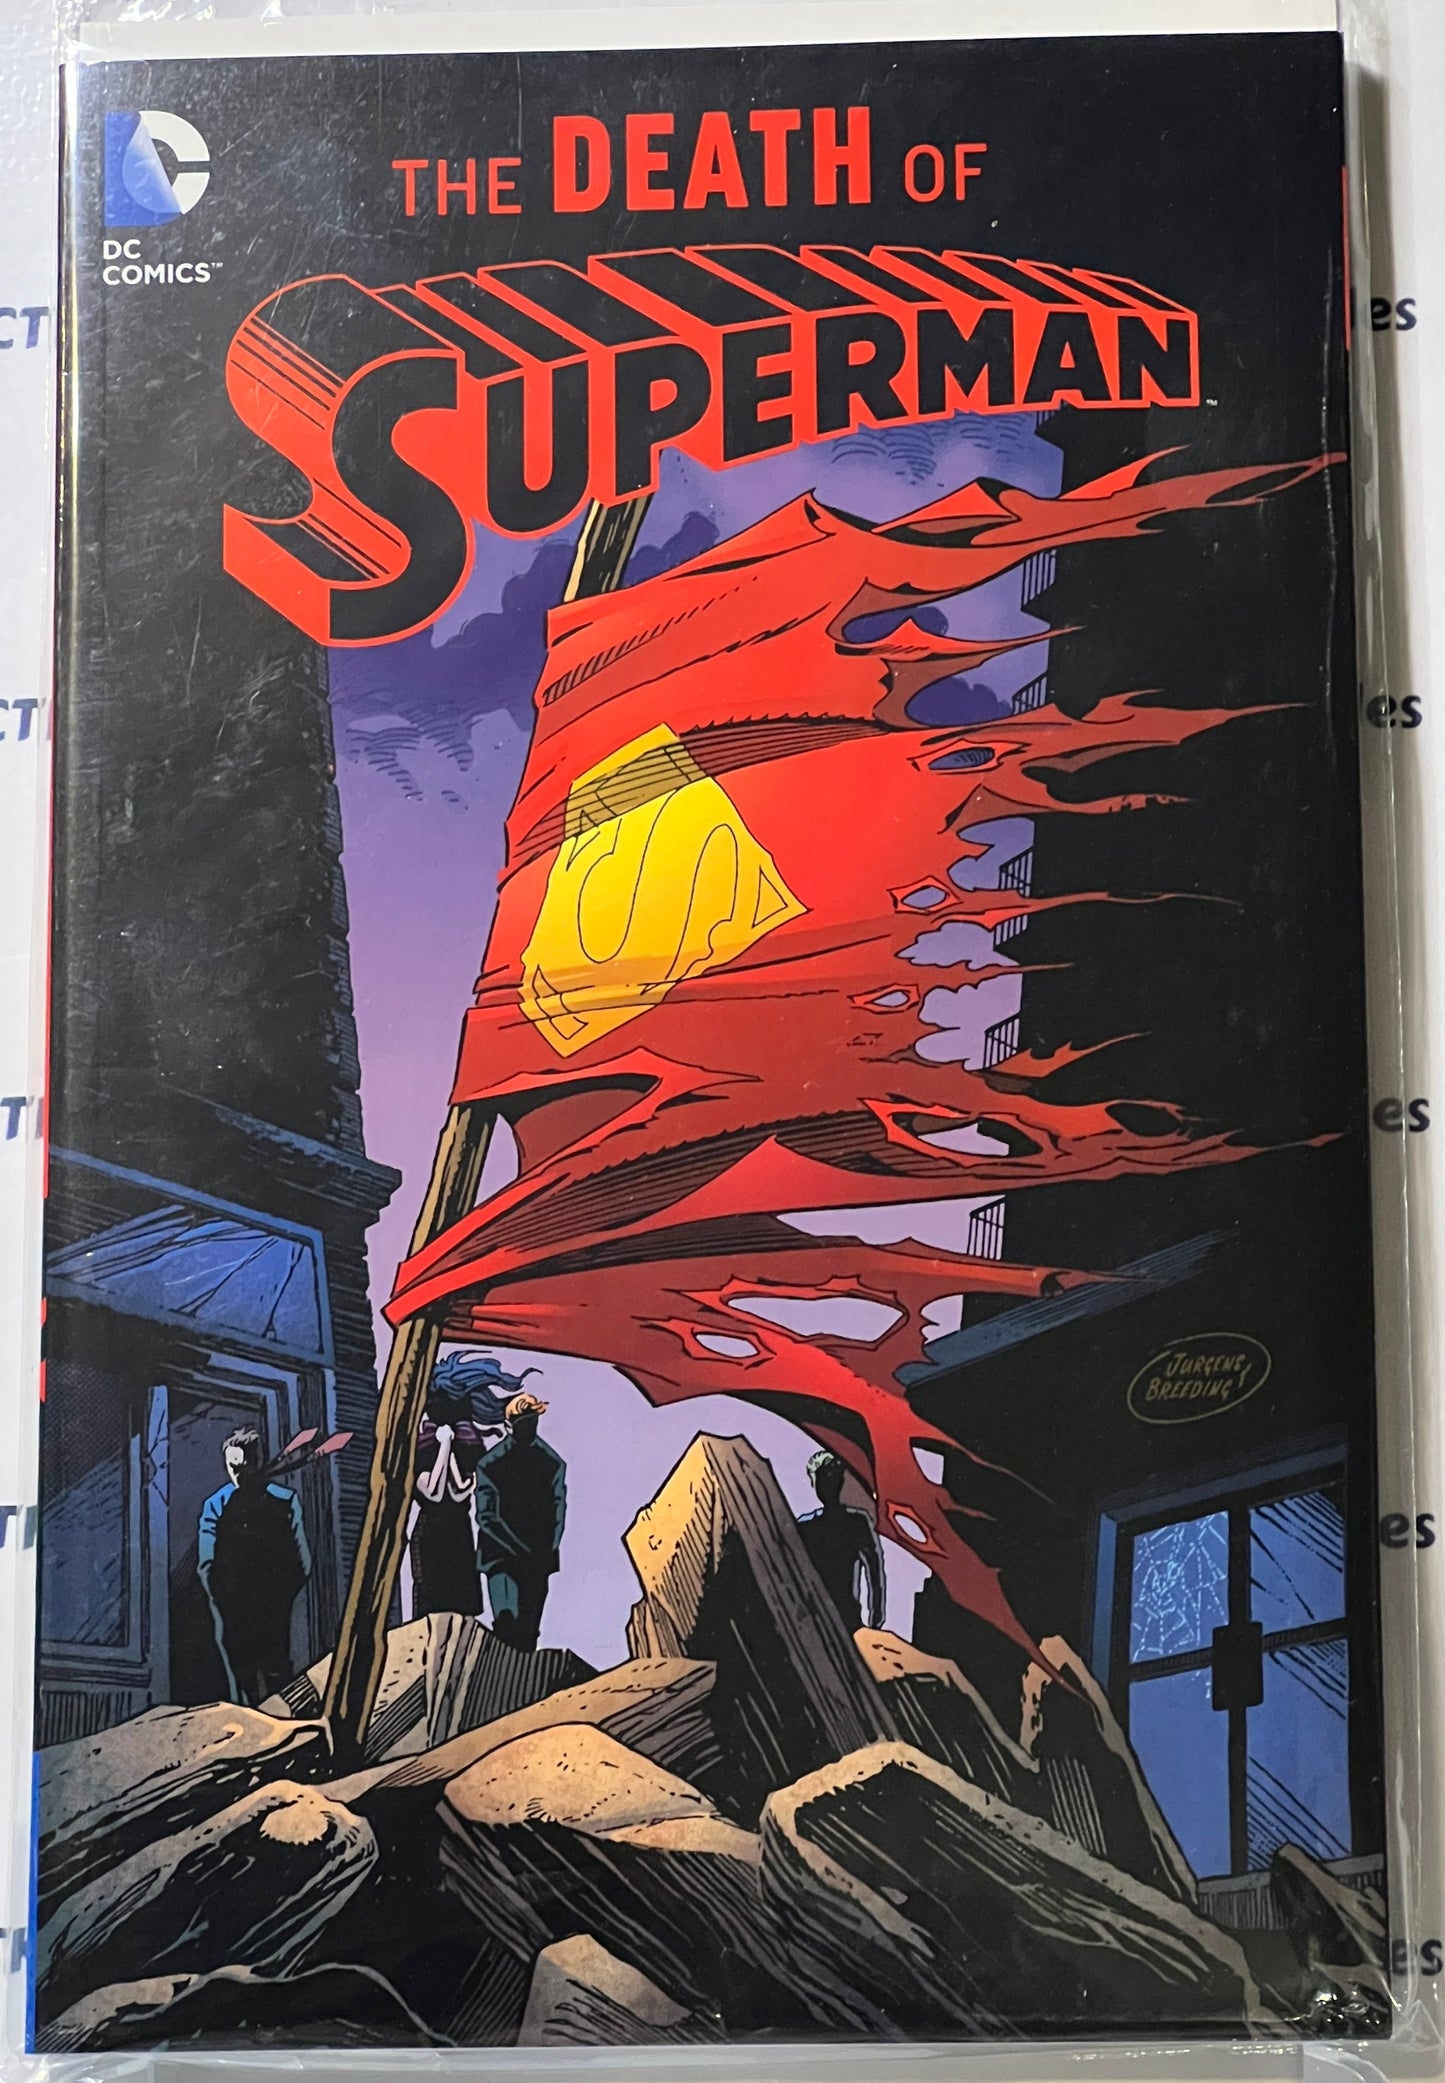 THE DEATH OF SUPERMAN  # 1 SOFT COVER TRADEBACK DC COMIC BOOK NEW EDITION